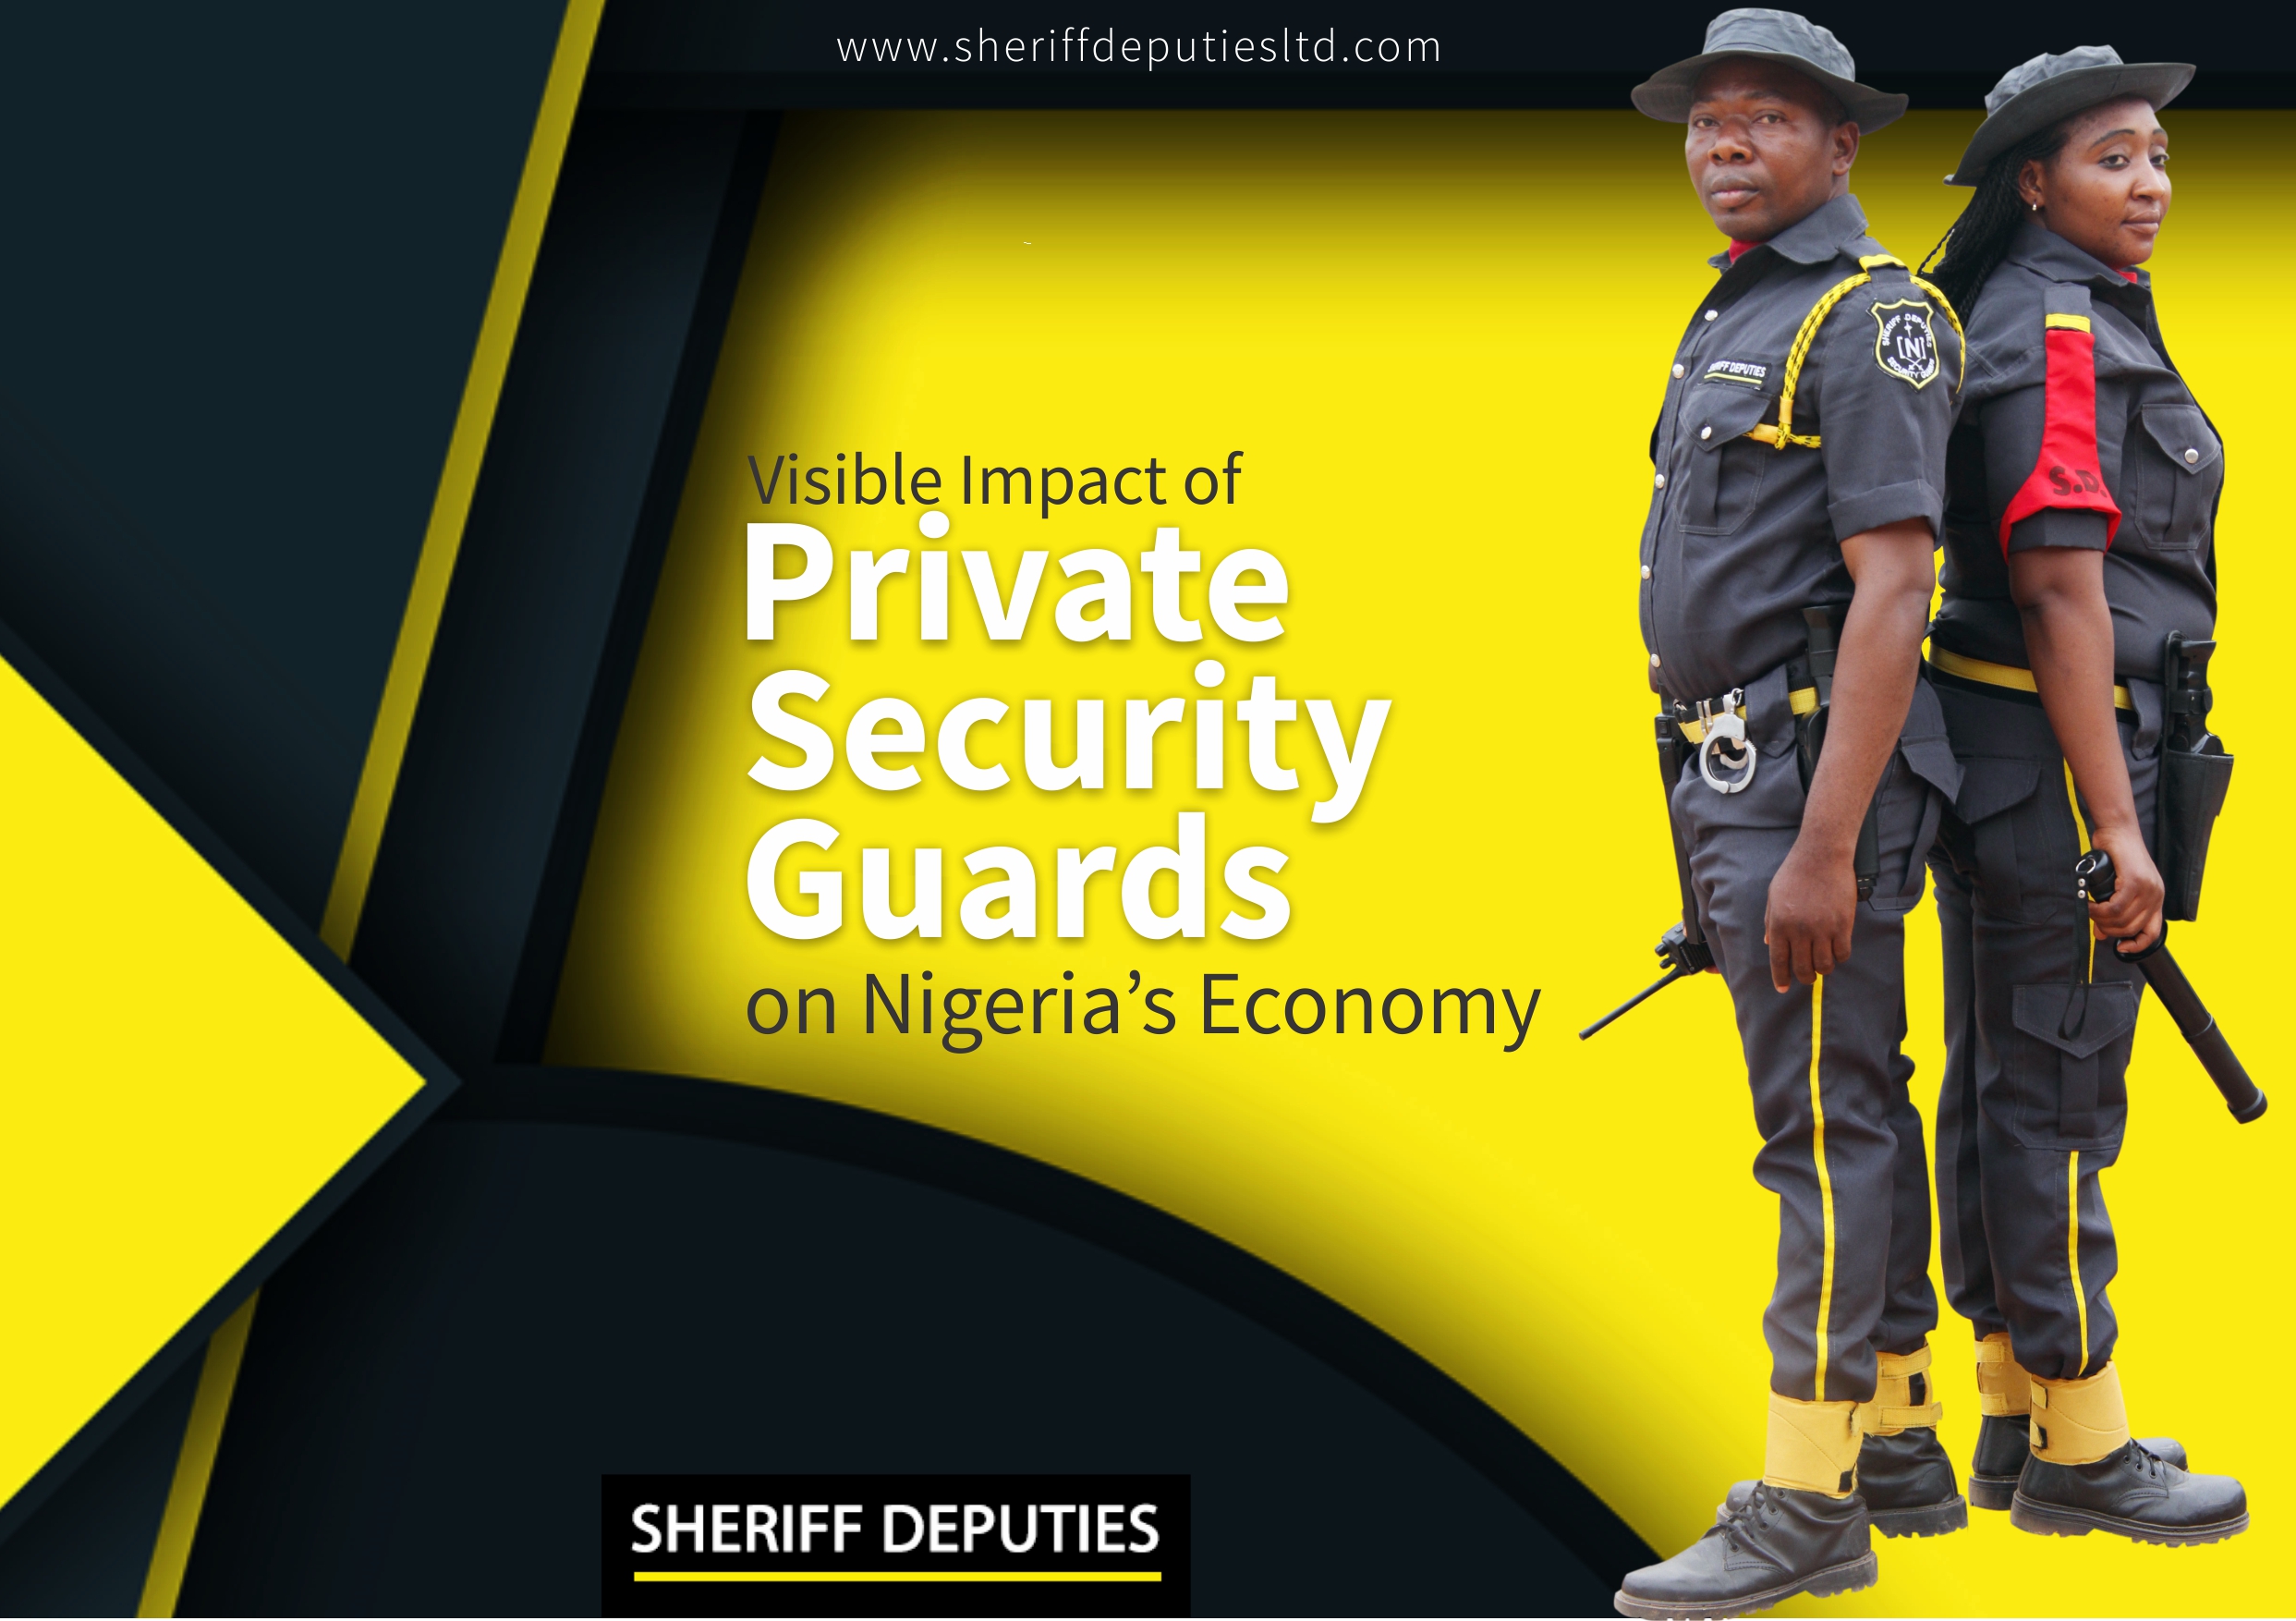 The 4 Visible Impacts of Private Security Guards on Nigeria’s Economy